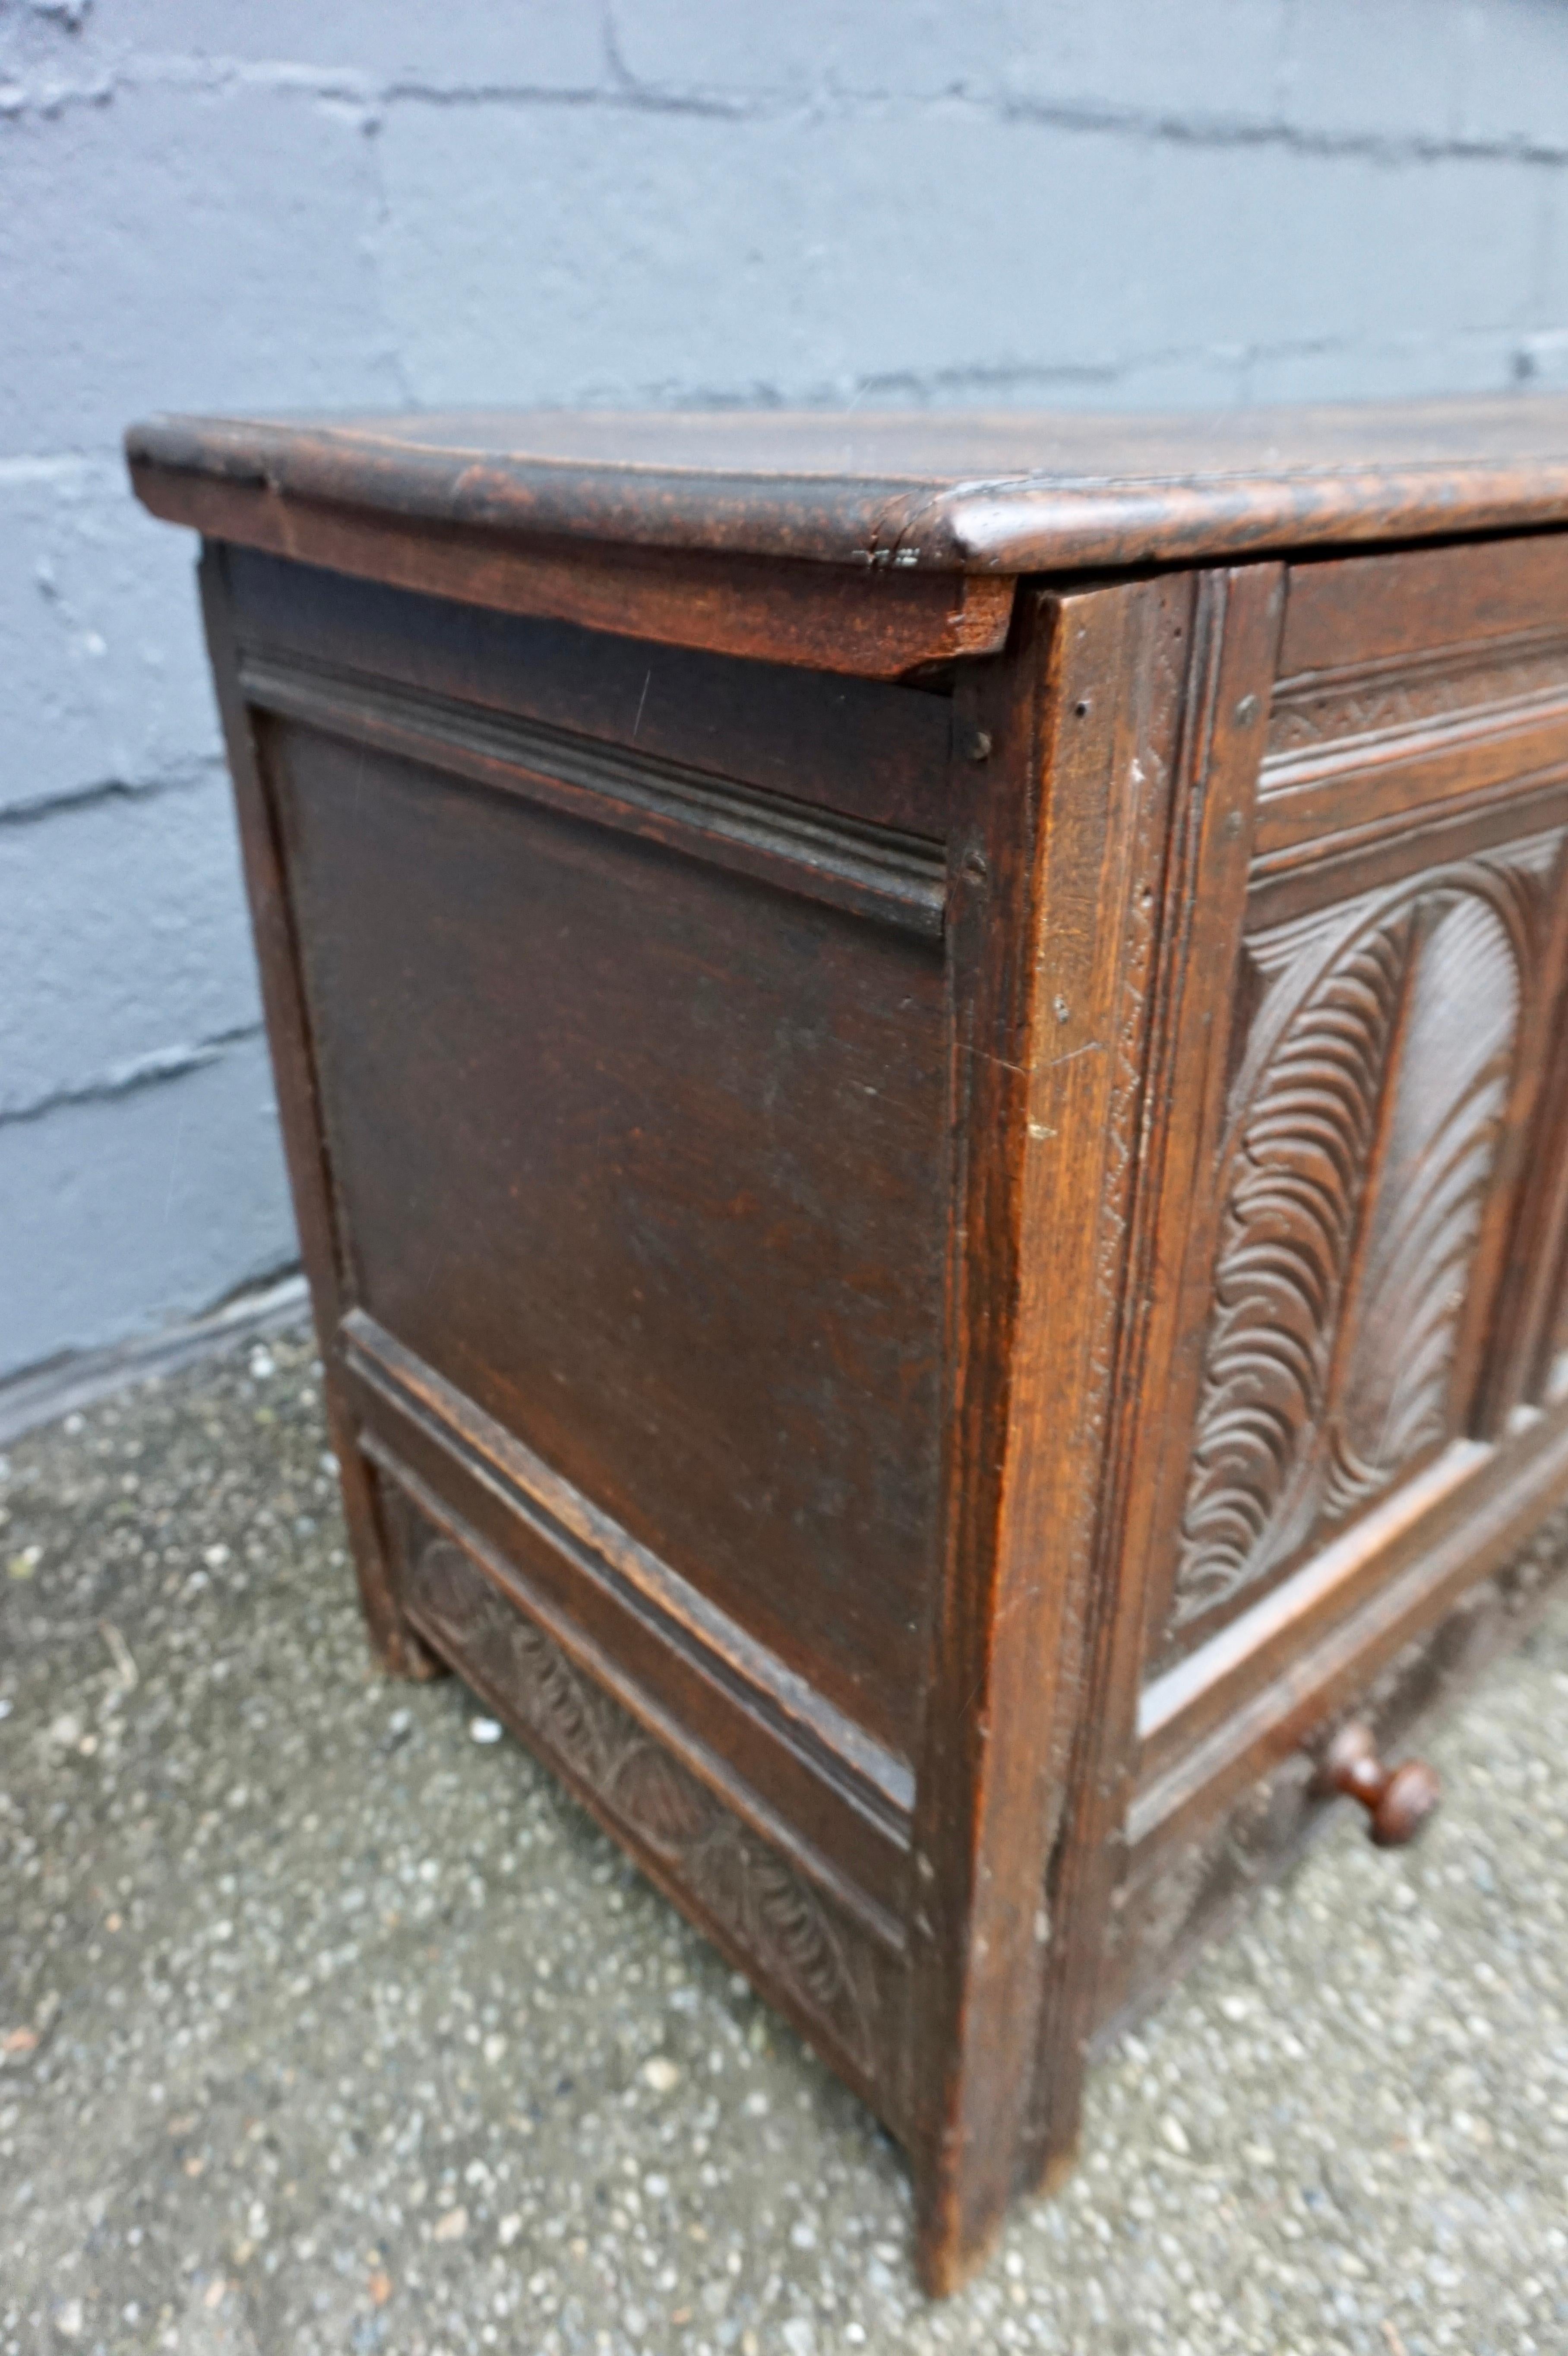 Very Rare 15th C. Medieval English Carved Solid Oak Dowry Coffer with Drawer In Good Condition For Sale In Vancouver, British Columbia